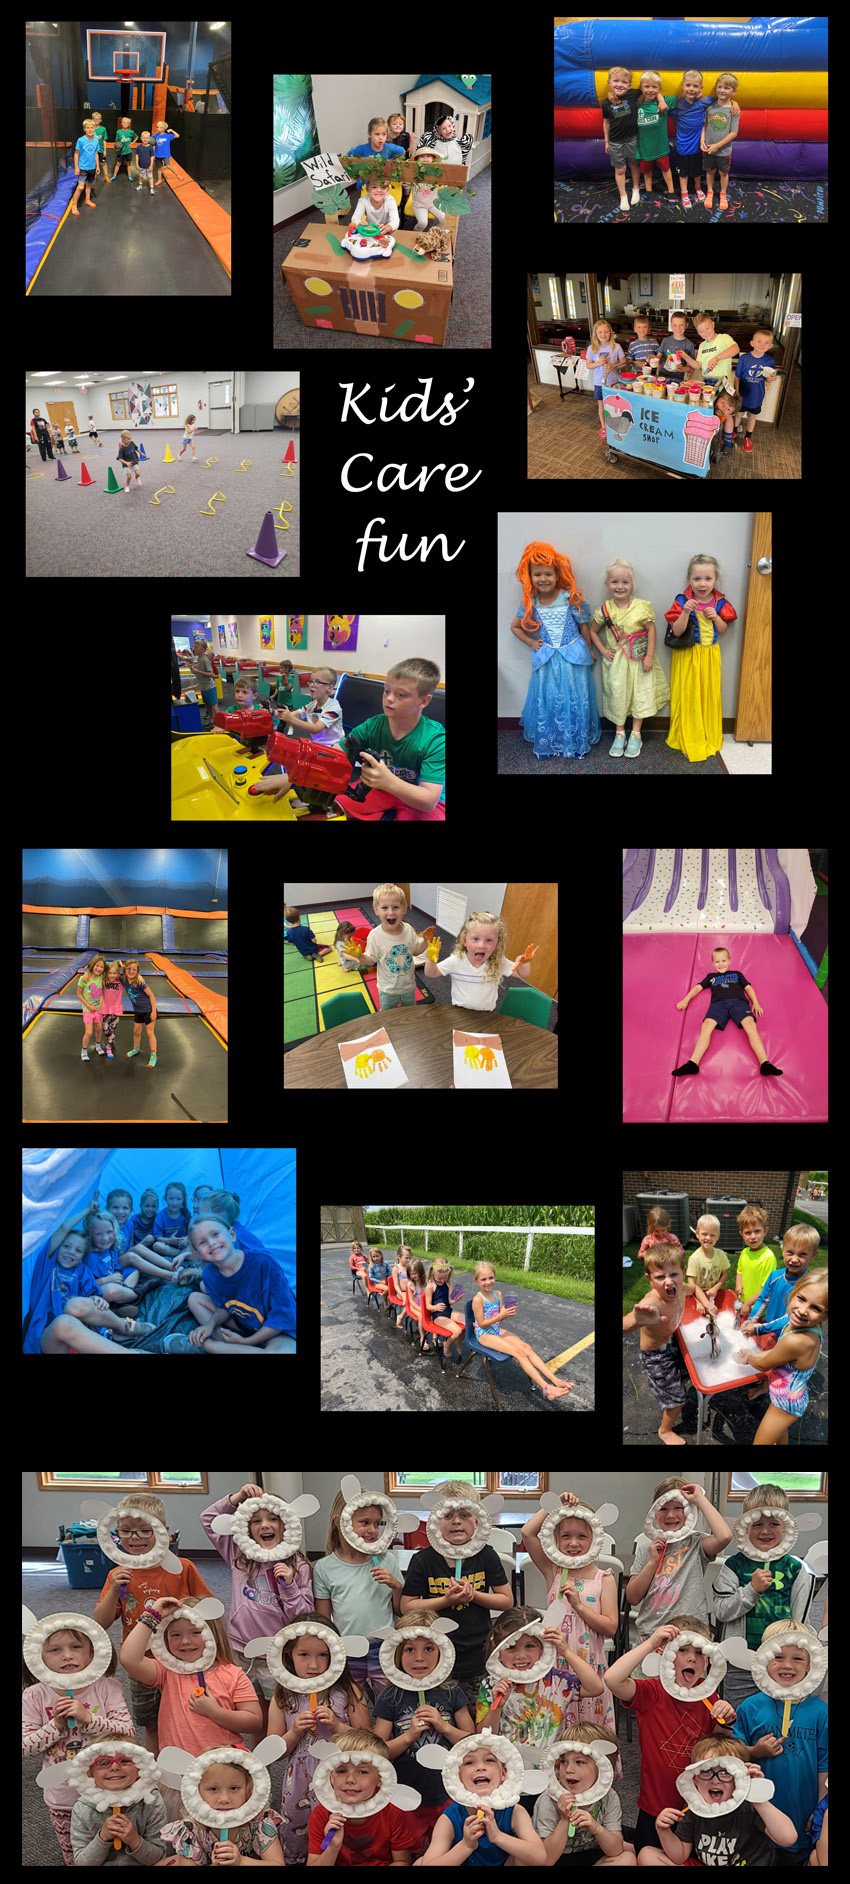 Kids Care Fun
a collage of pictures from activities and field trips